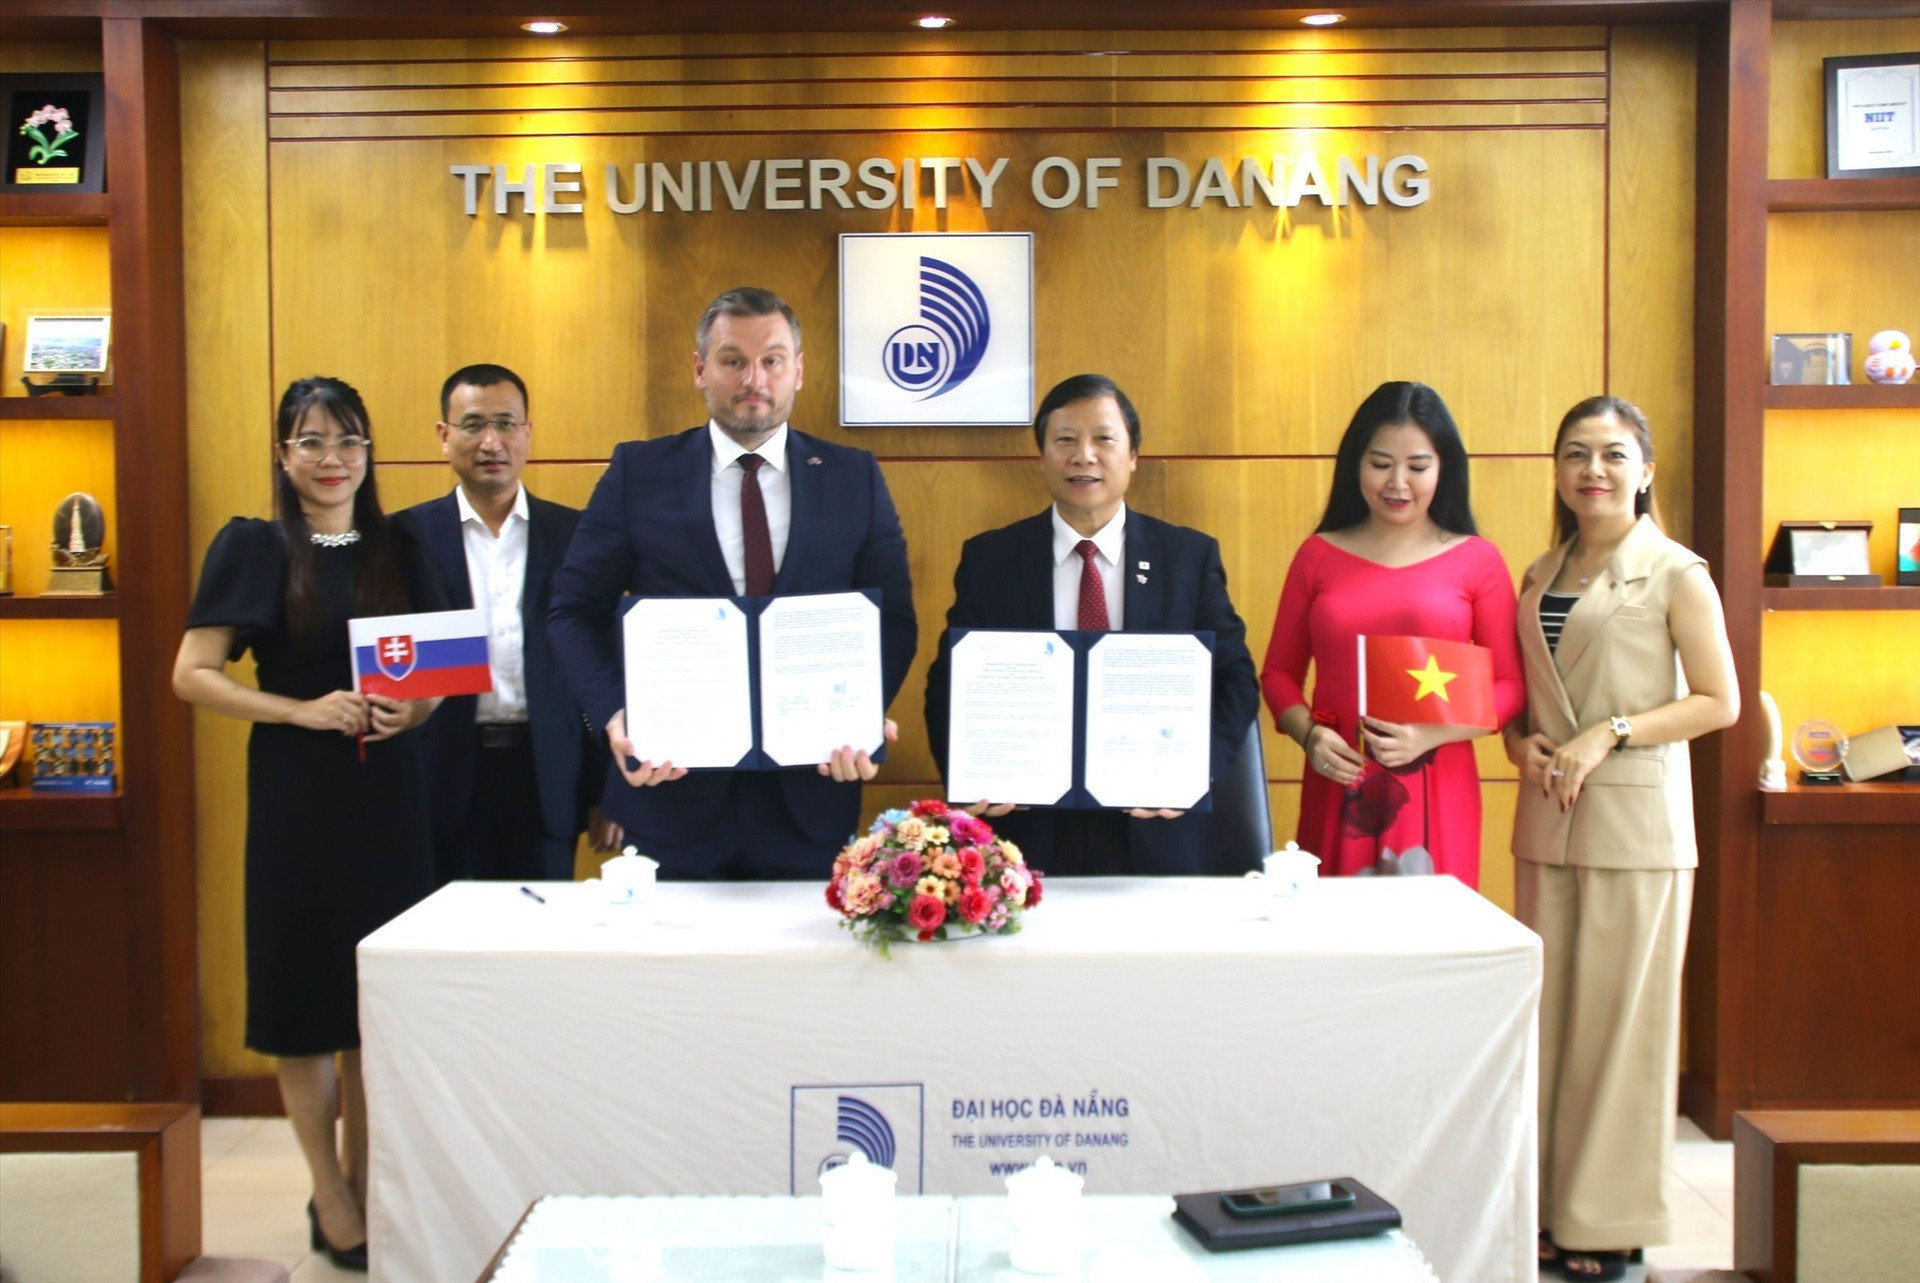 A memorandum of cooperation was signed by leaders from the University of Danang and Technical University of Košice.